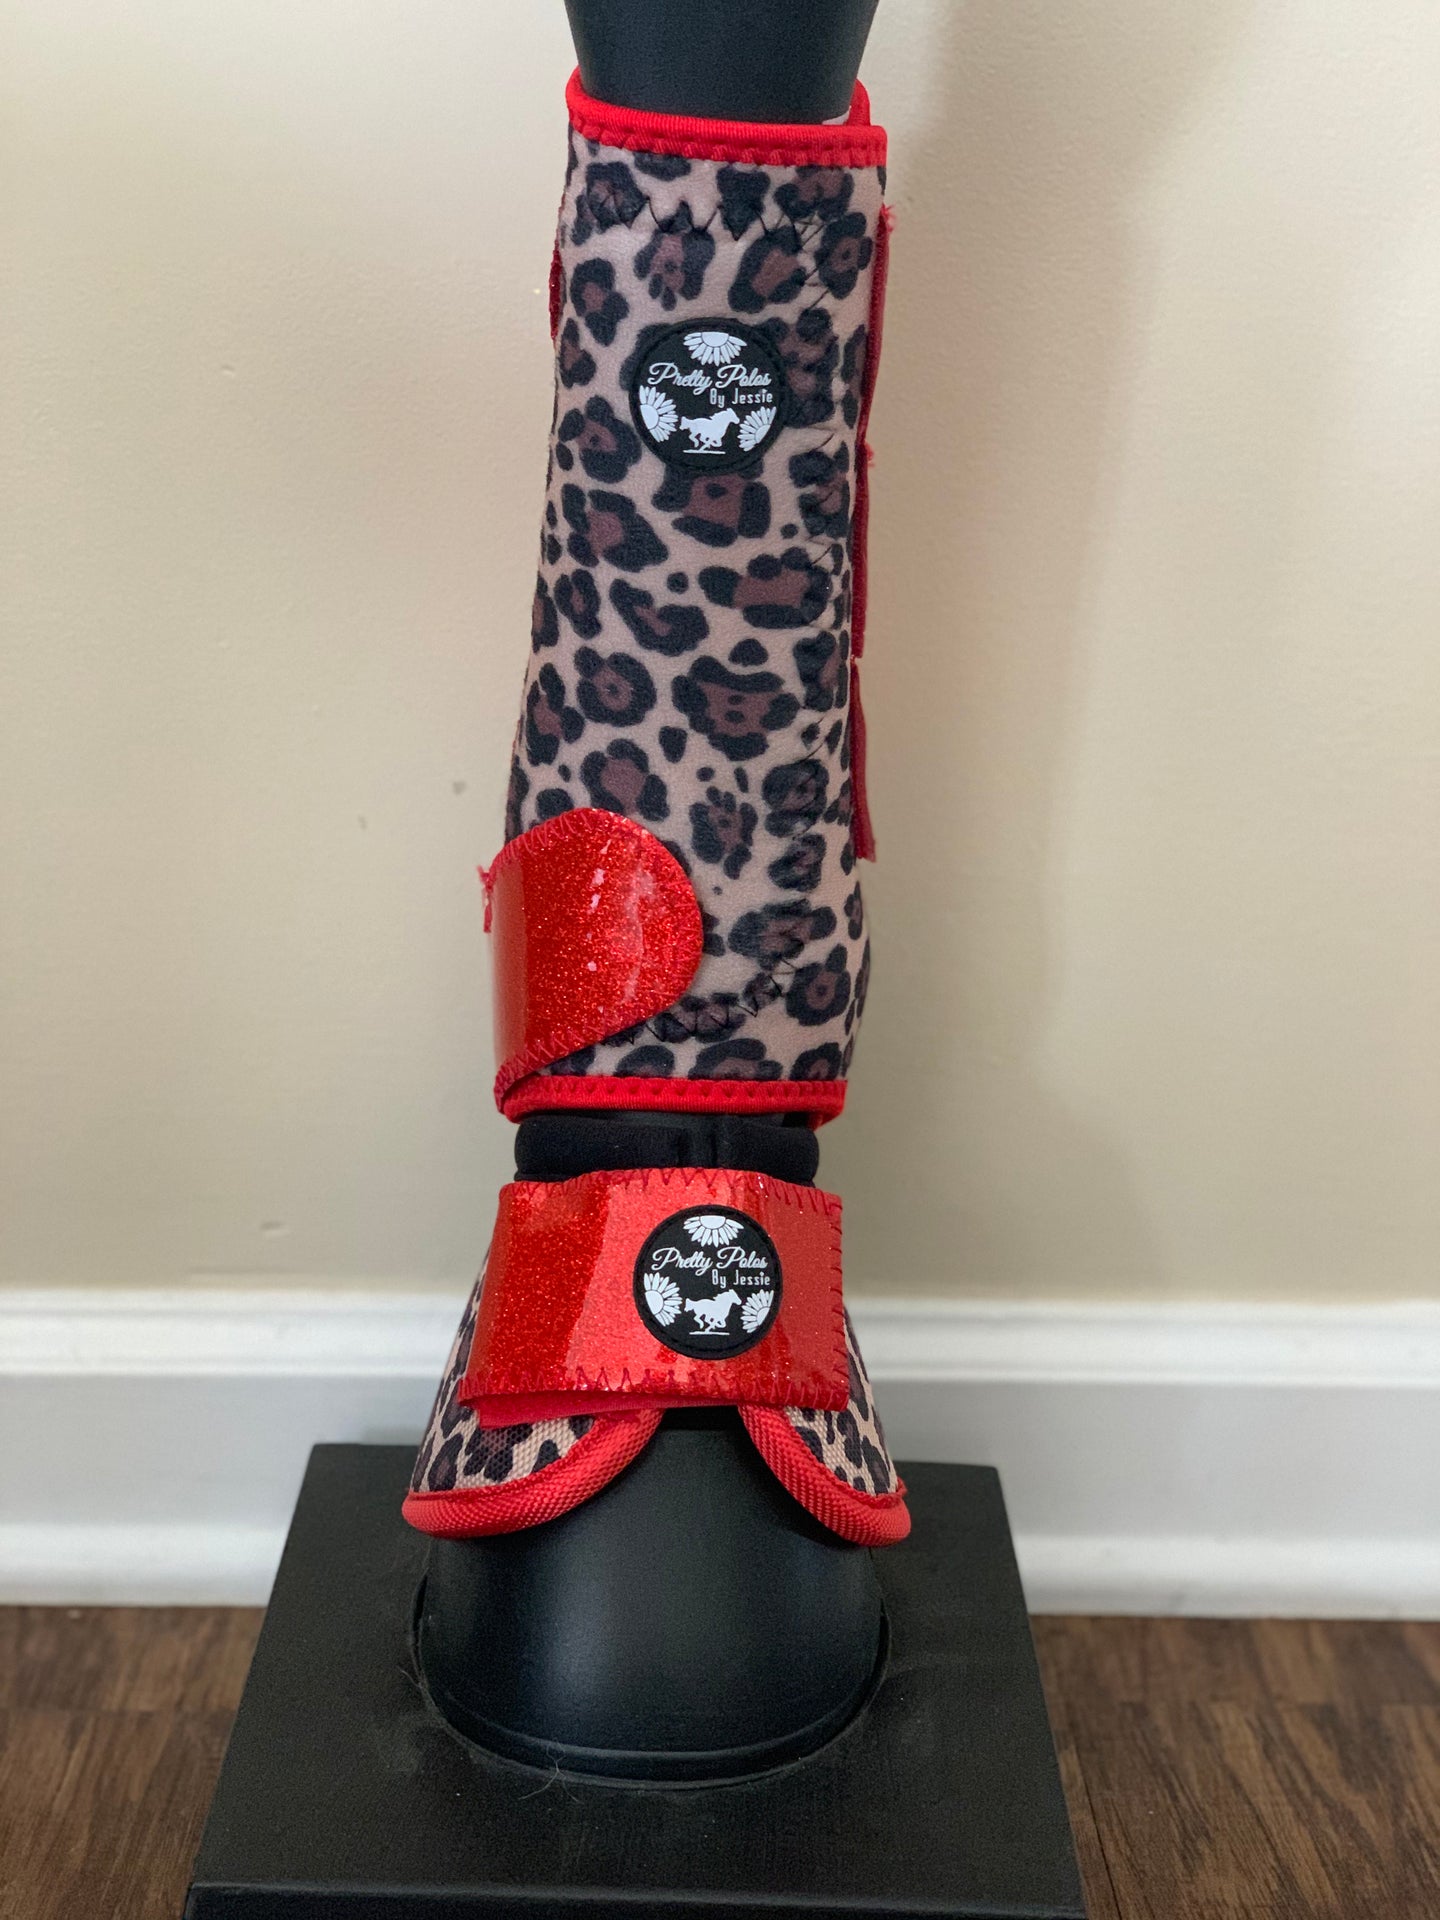 Cheetah Sport Boots with red glitter straps